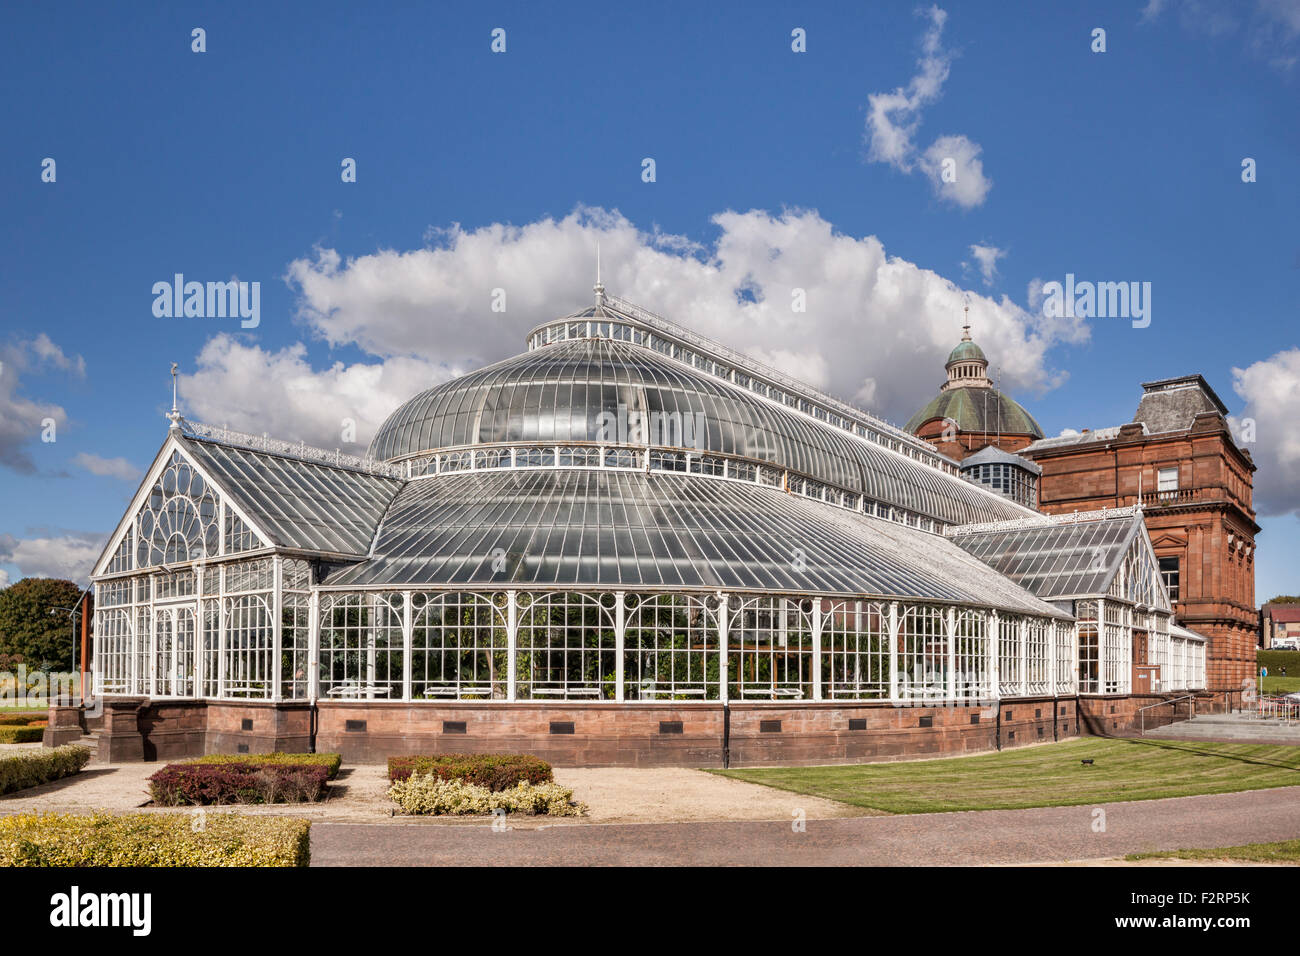 The Winter Gardens and People's Palace museum, Glasgow Green, Scotland. Stock Photo